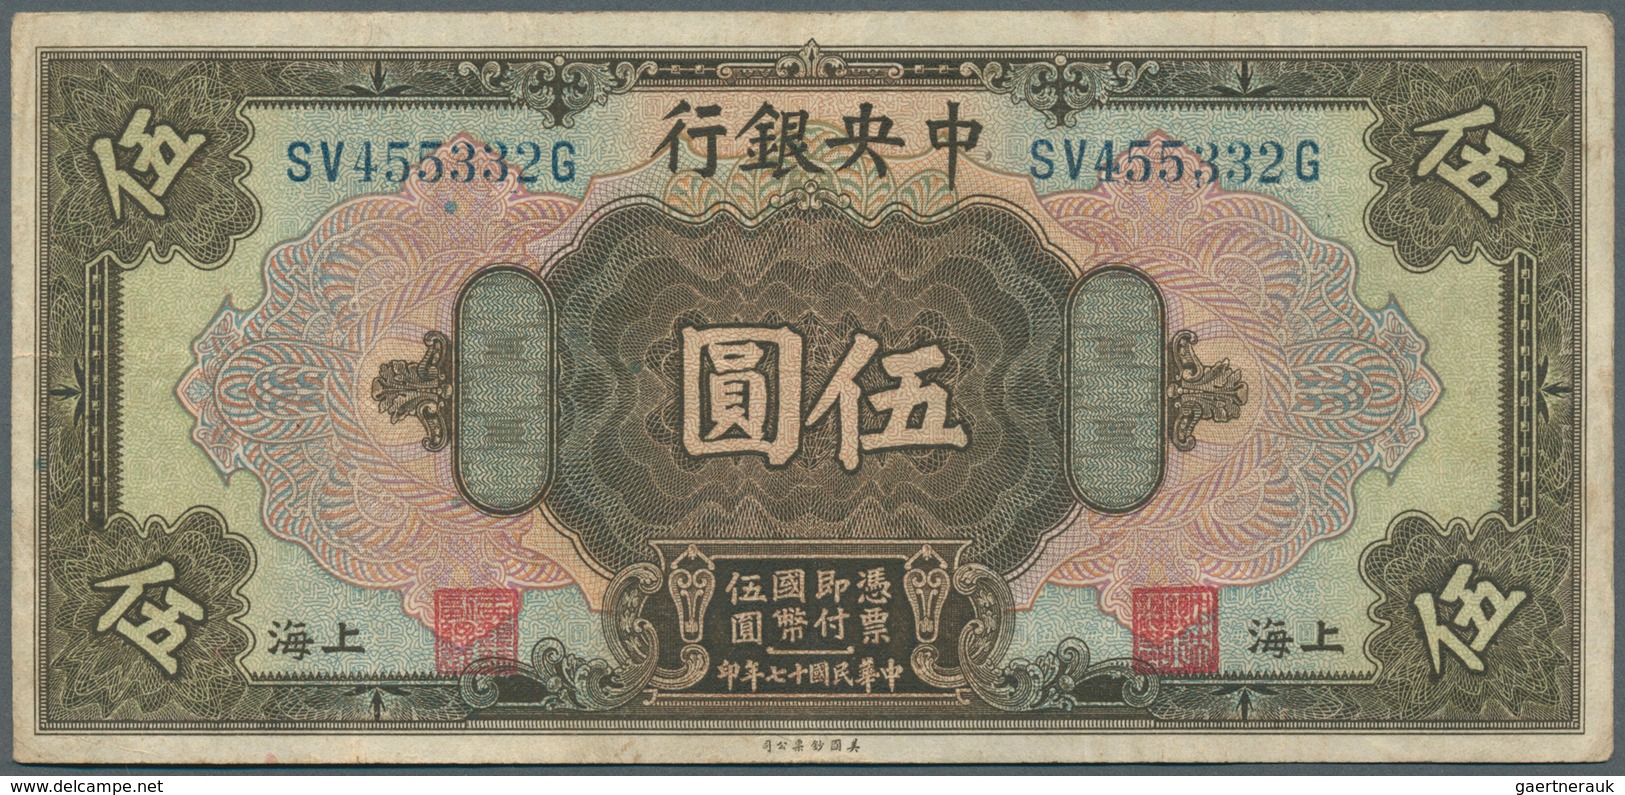 01292 China: 5 Dollars 1928 The Central Bank Of China P. 196d, Used With Several Folds But Still Strong Pa - Cina